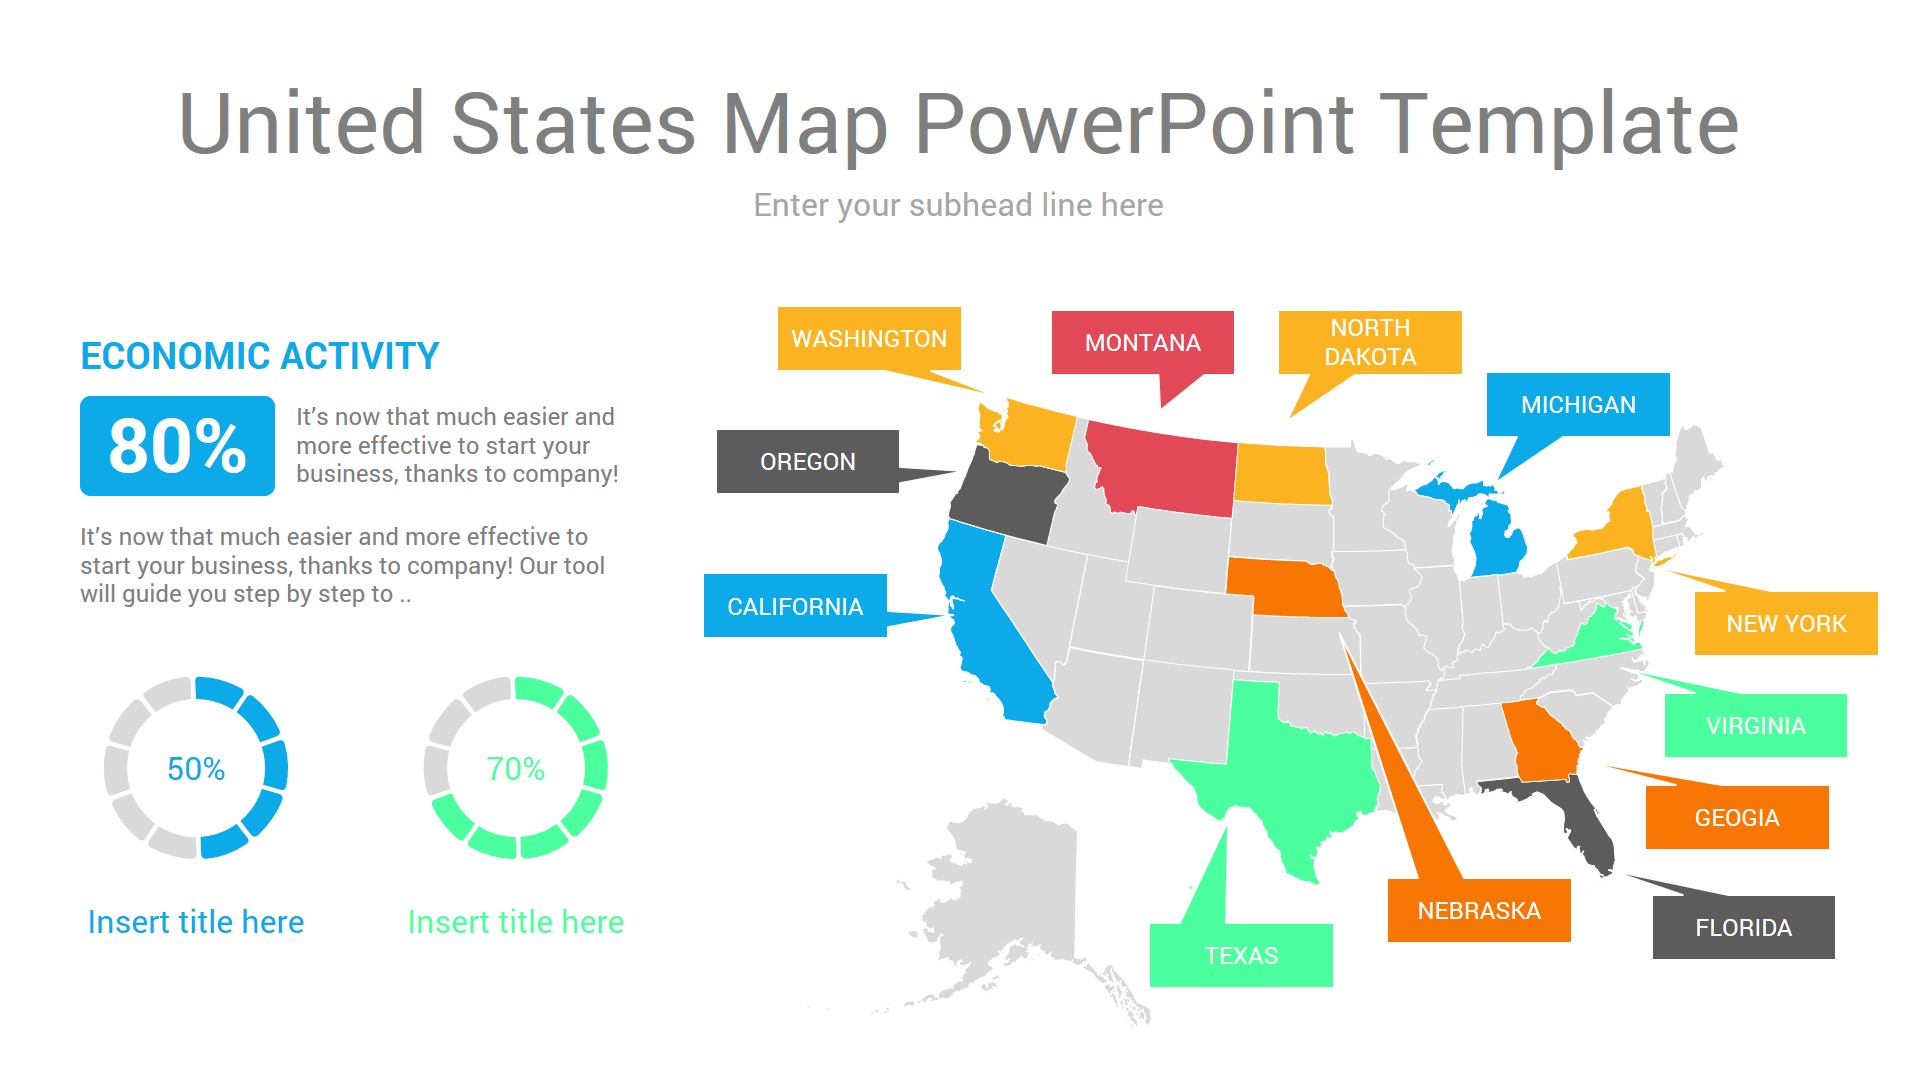 United States map powerpoint template